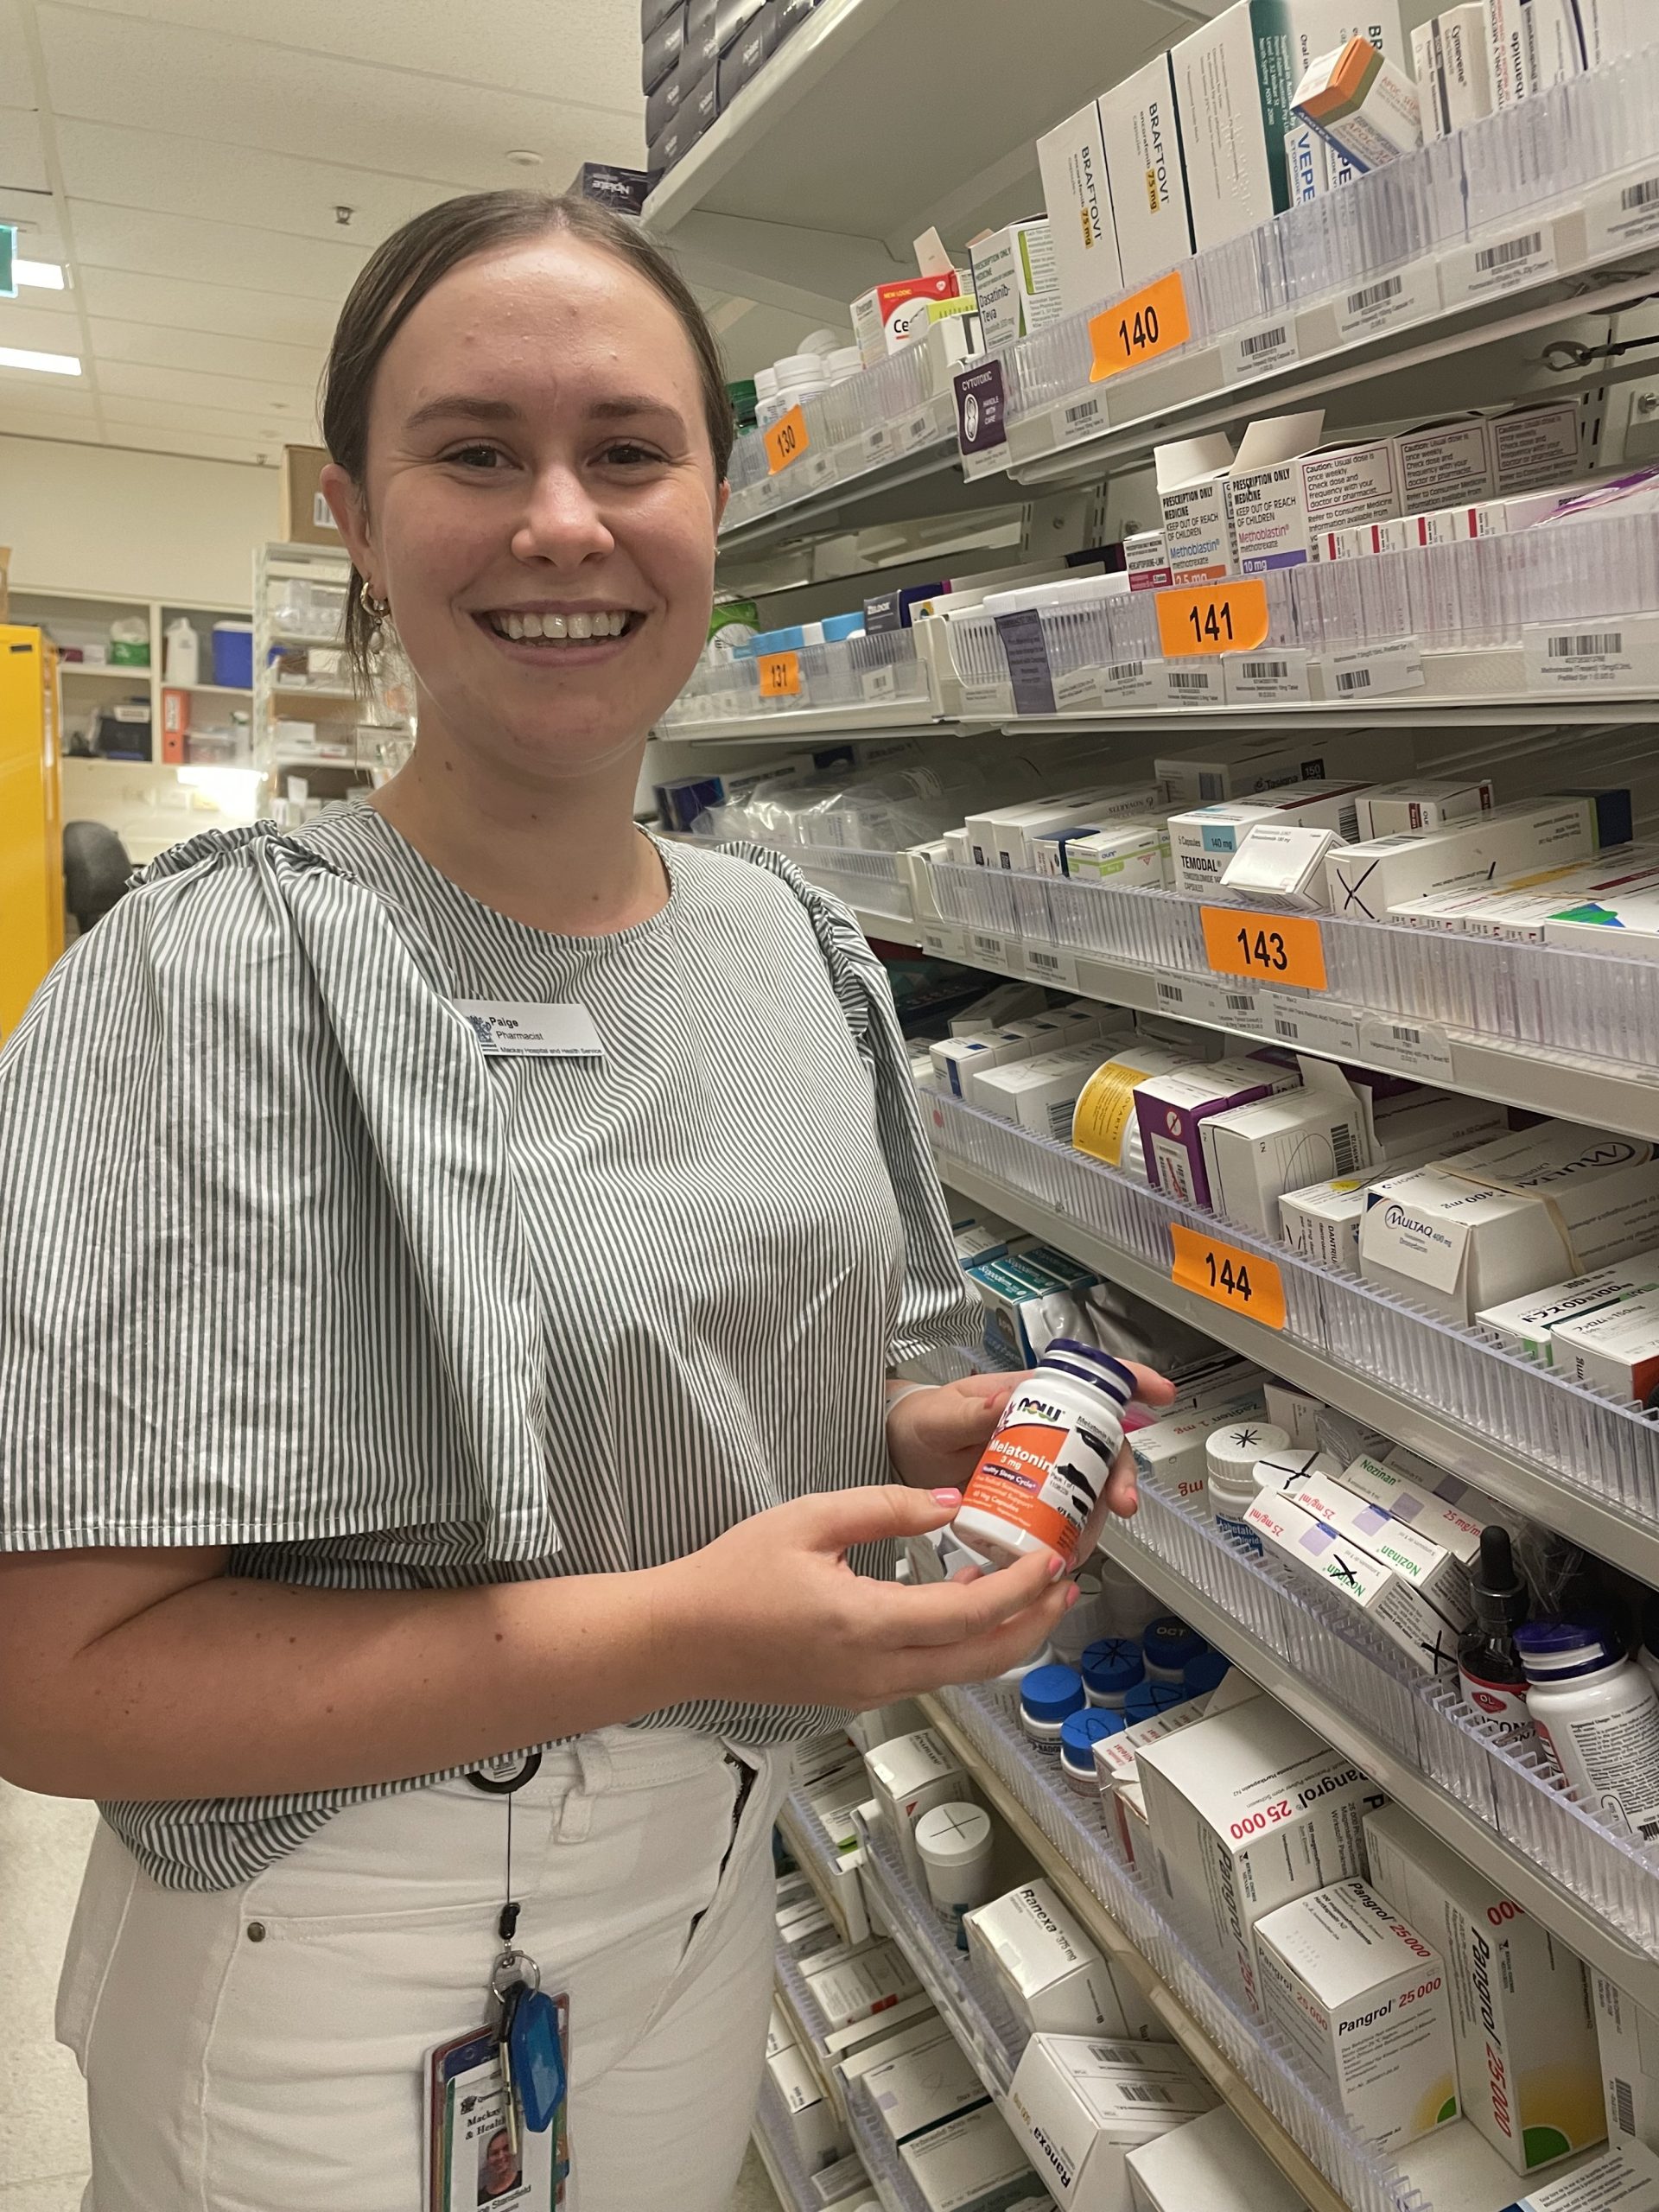 Rural stint offers awesome learning opportunities for pharmacist